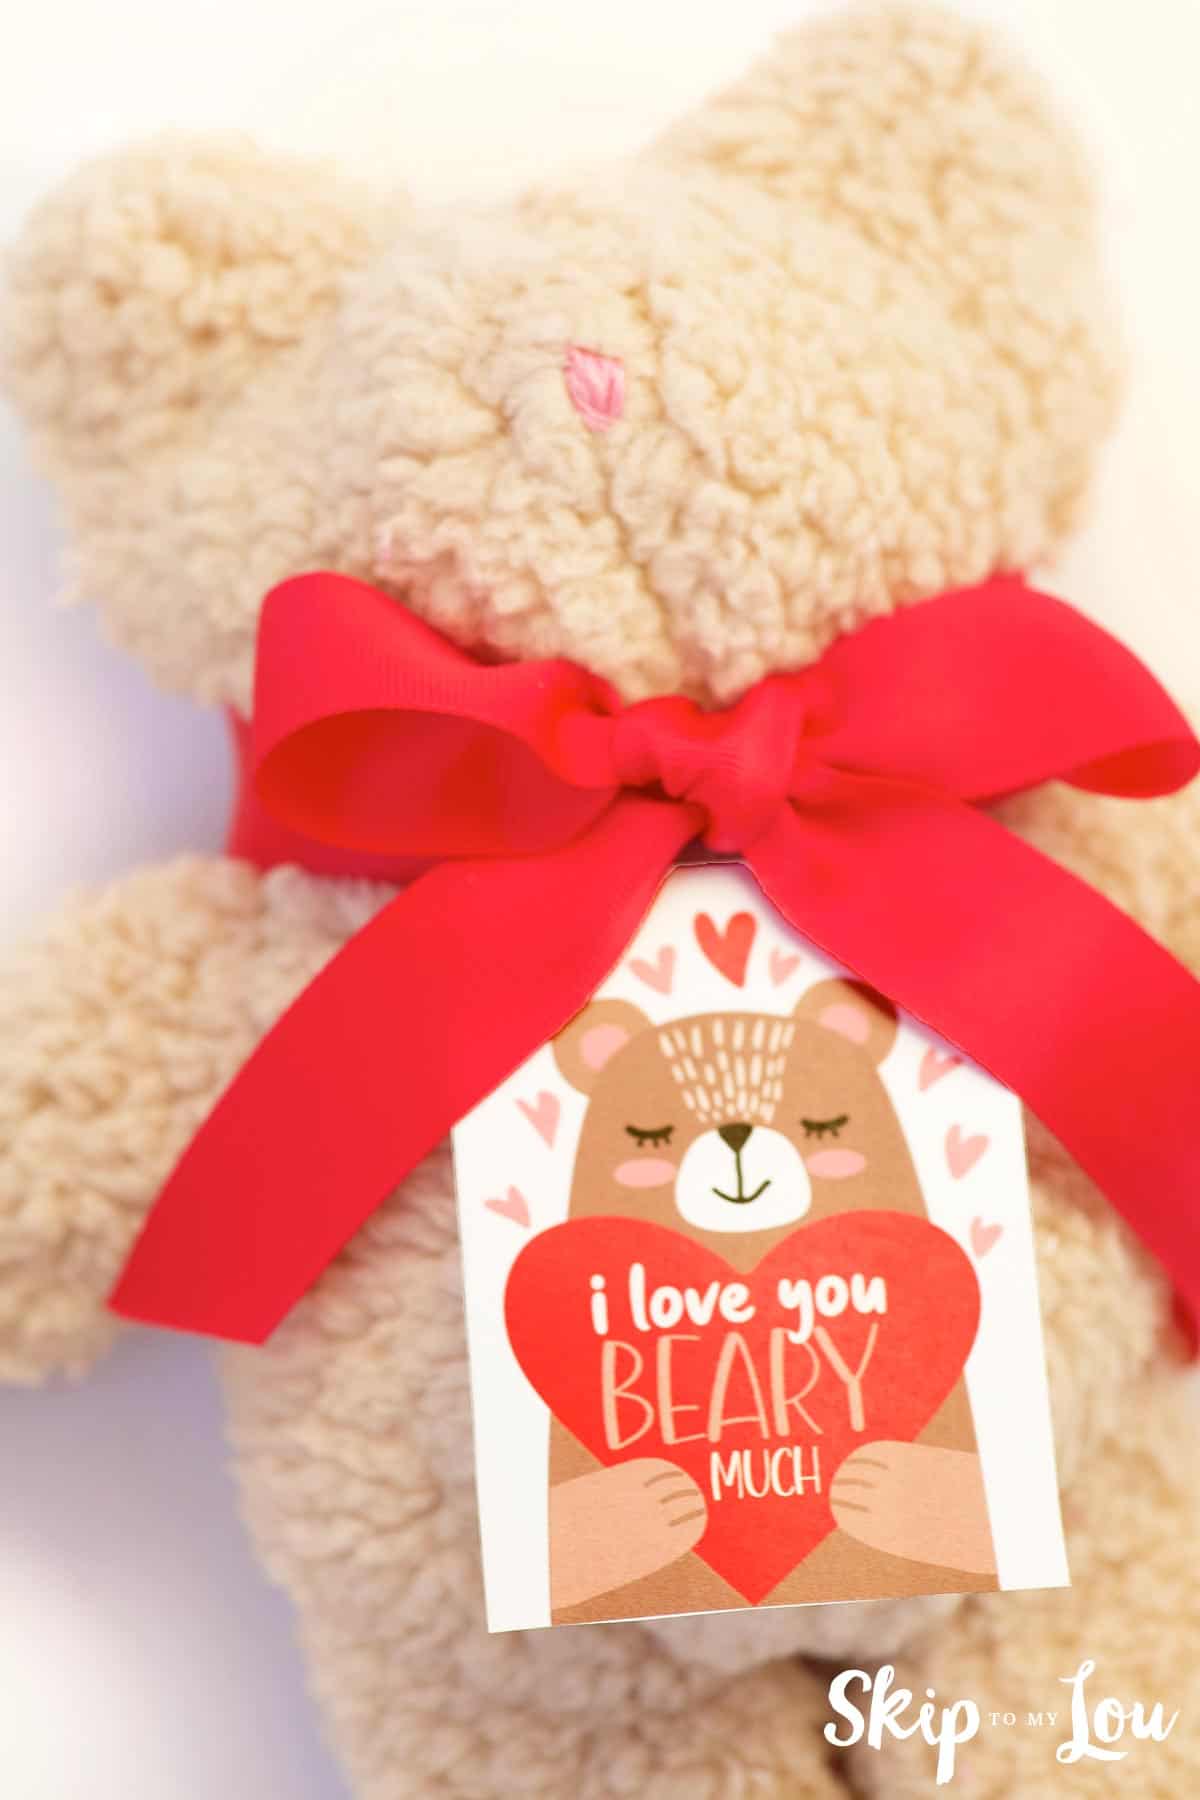 I love you beary much tag for bear day